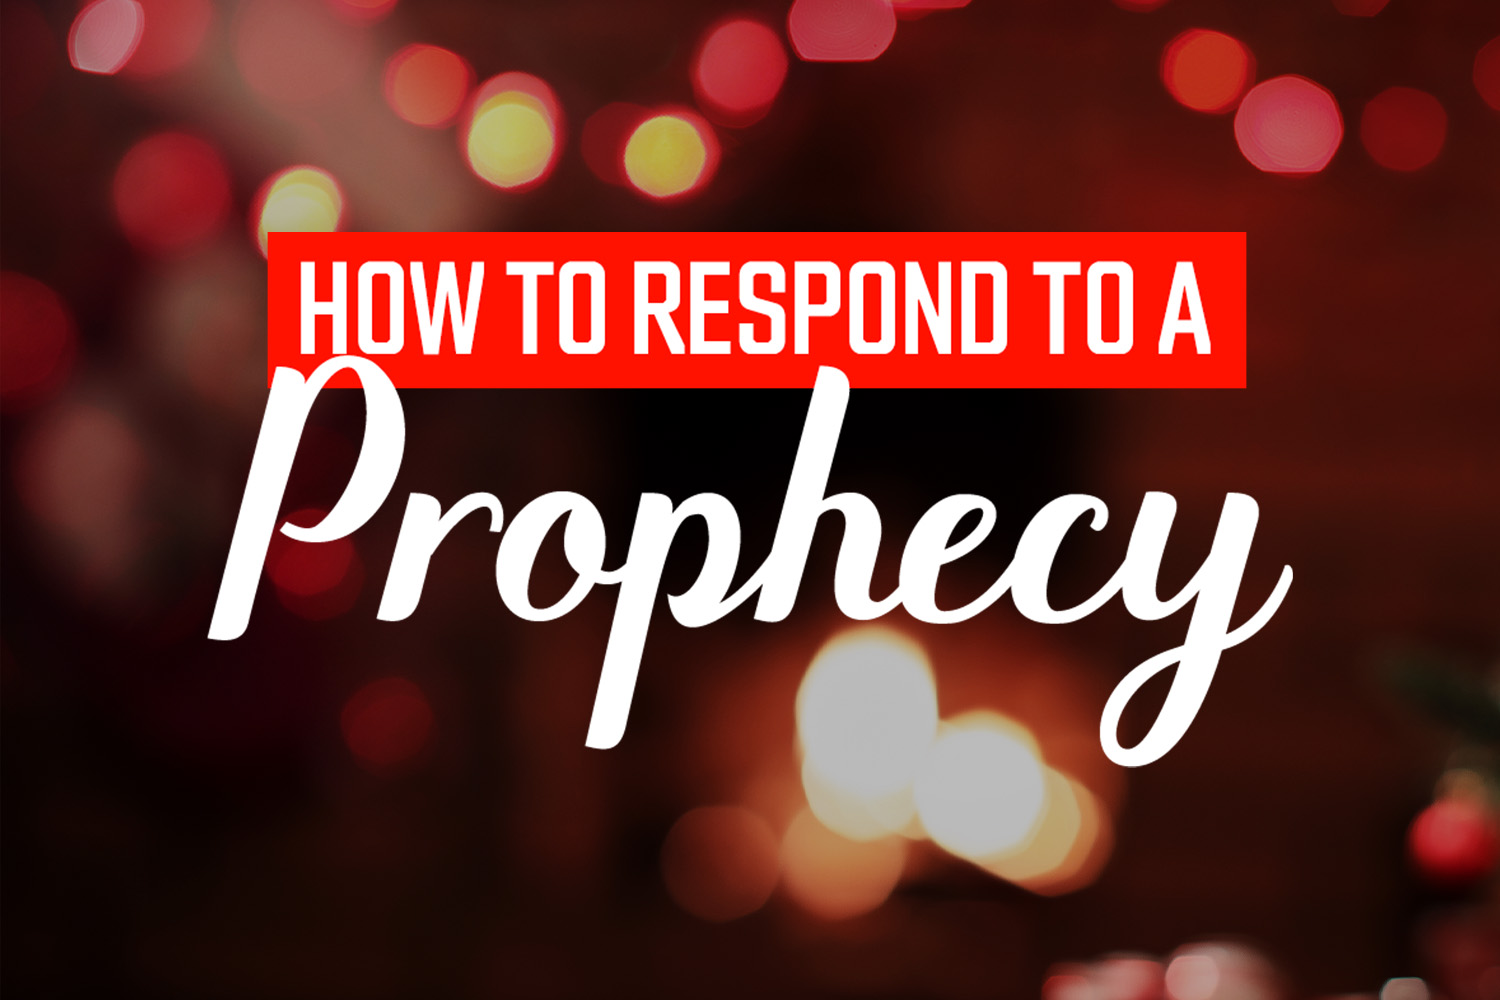 How To Respond to a Prophecy